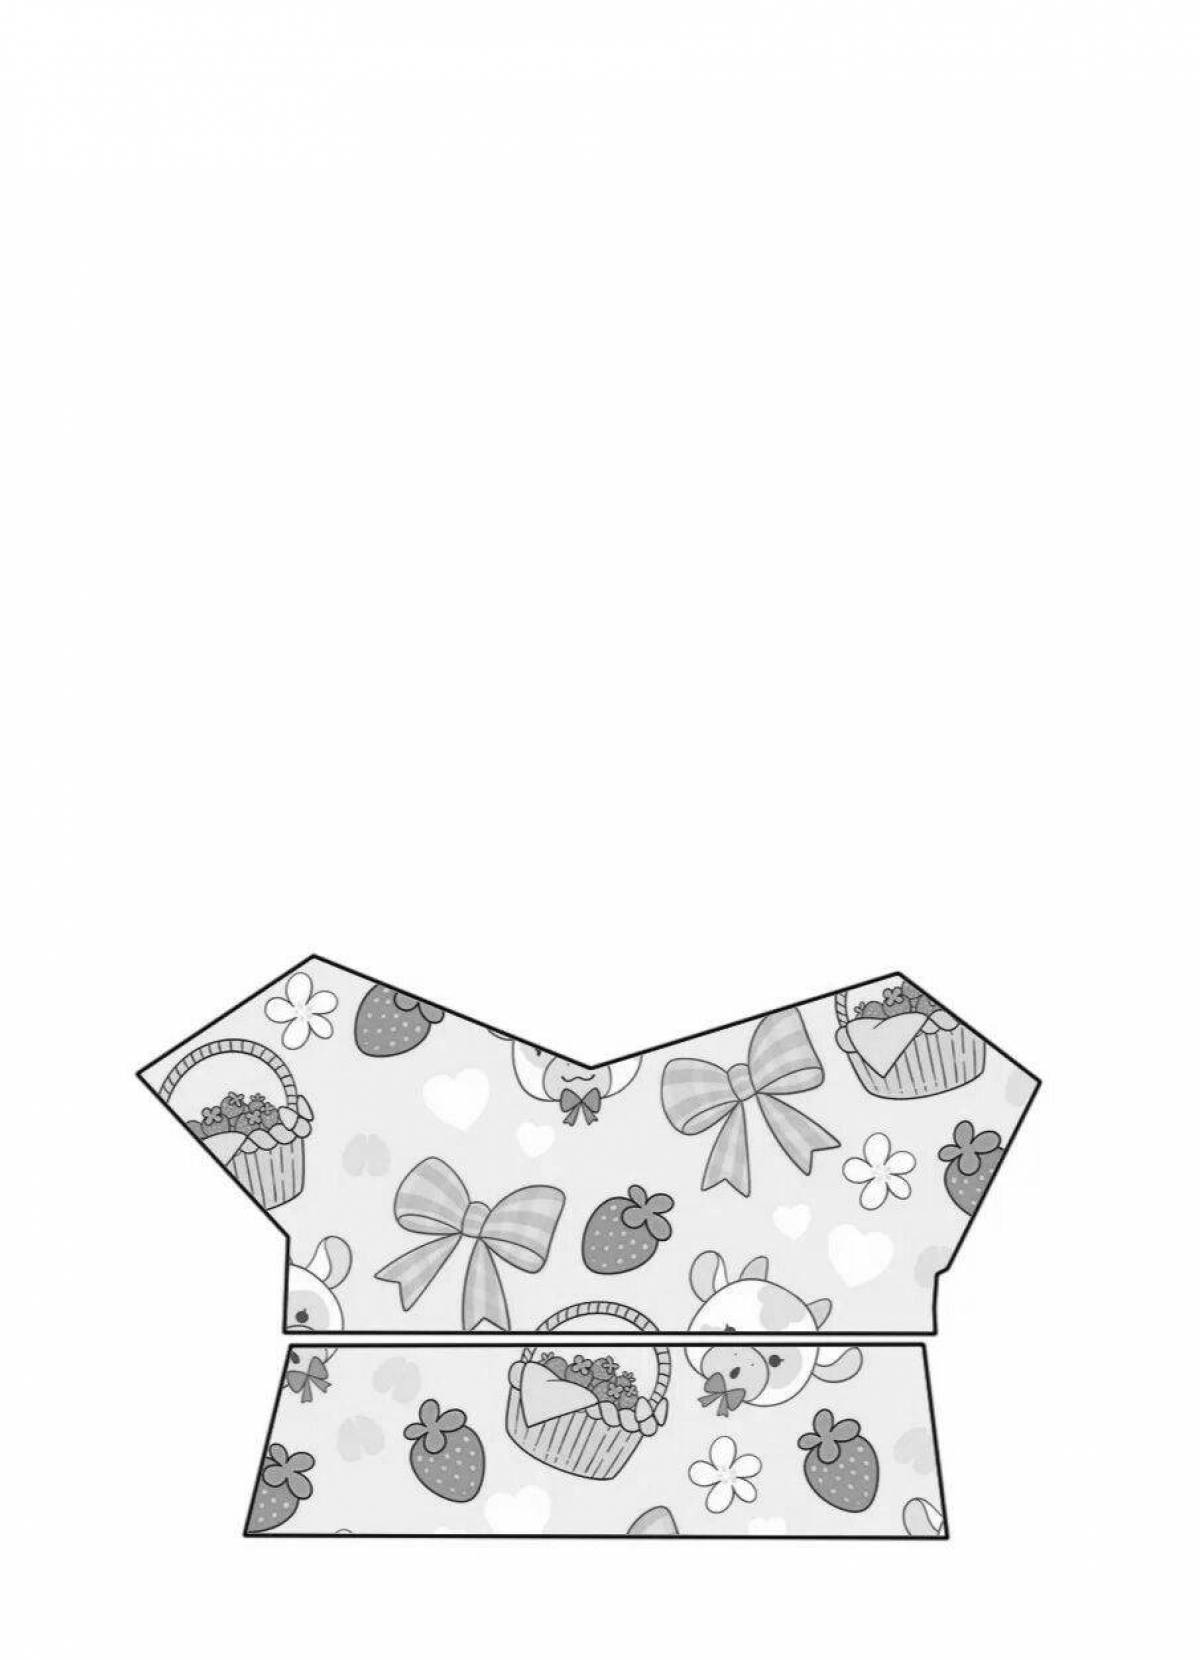 Coloring page adorable clothes for paper duck lalafanfan